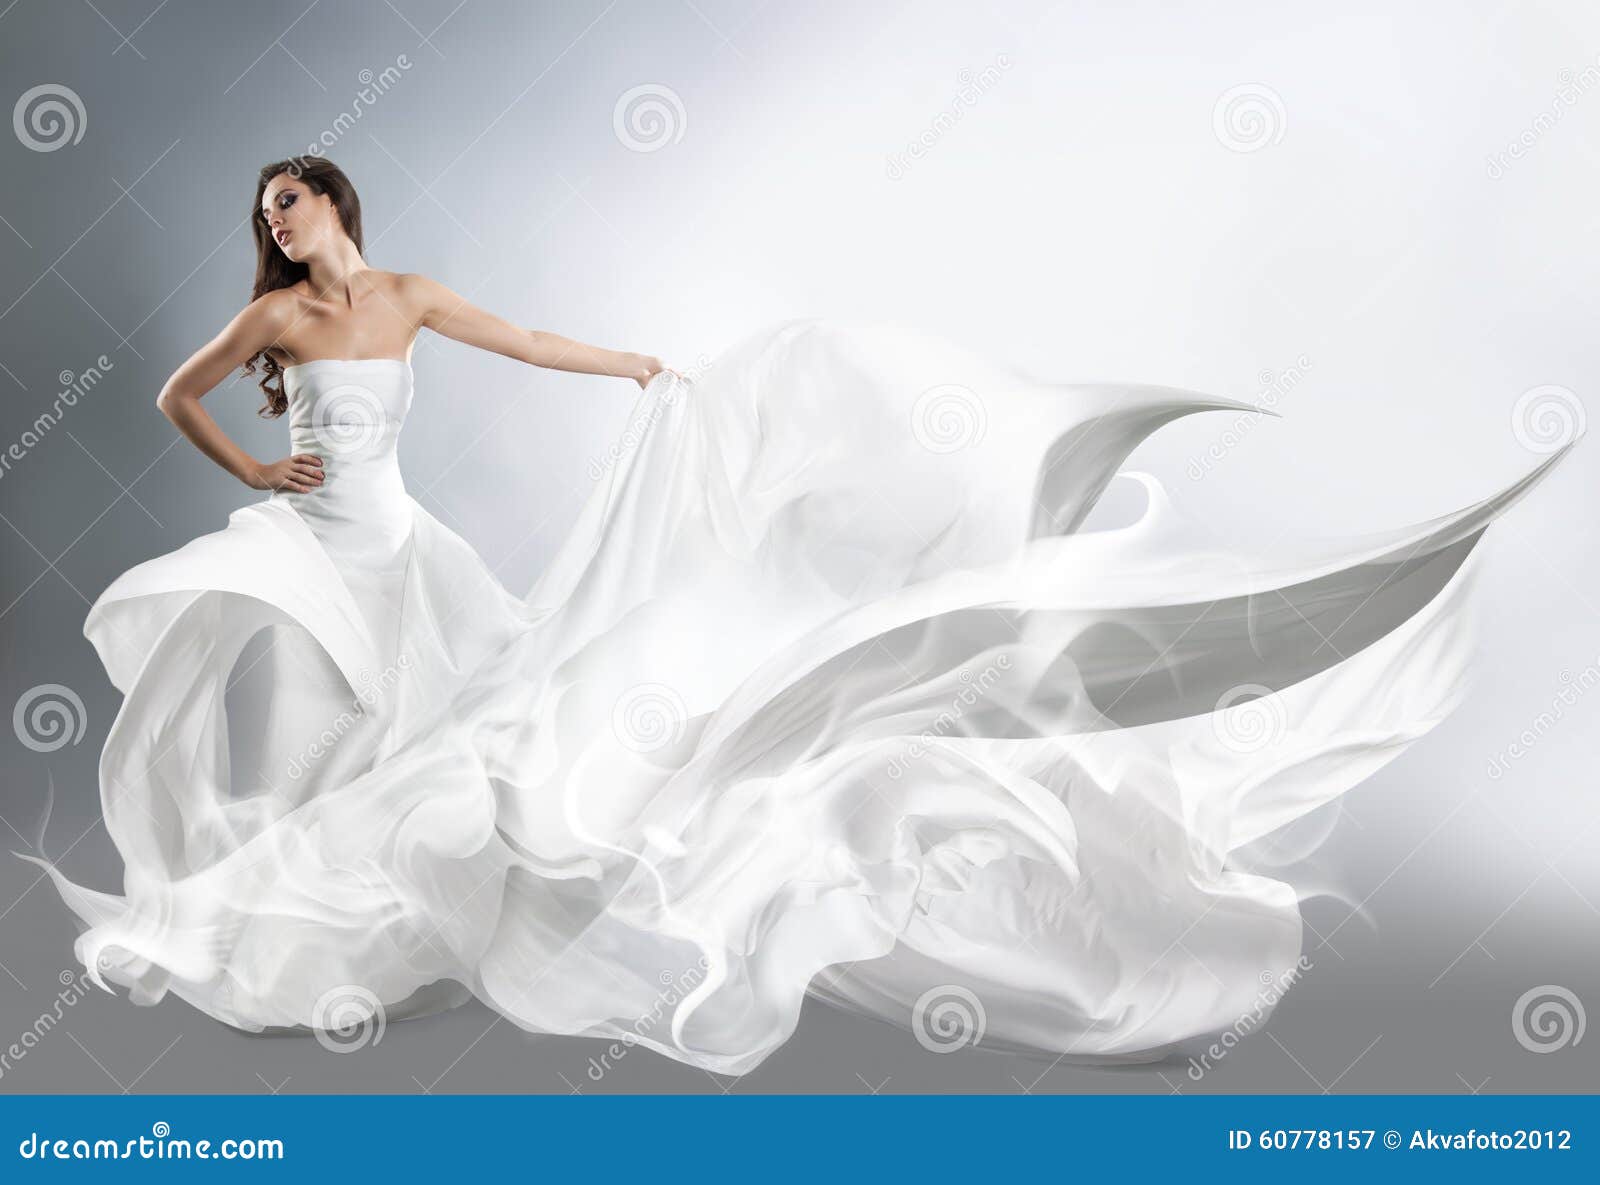 white flowing dress